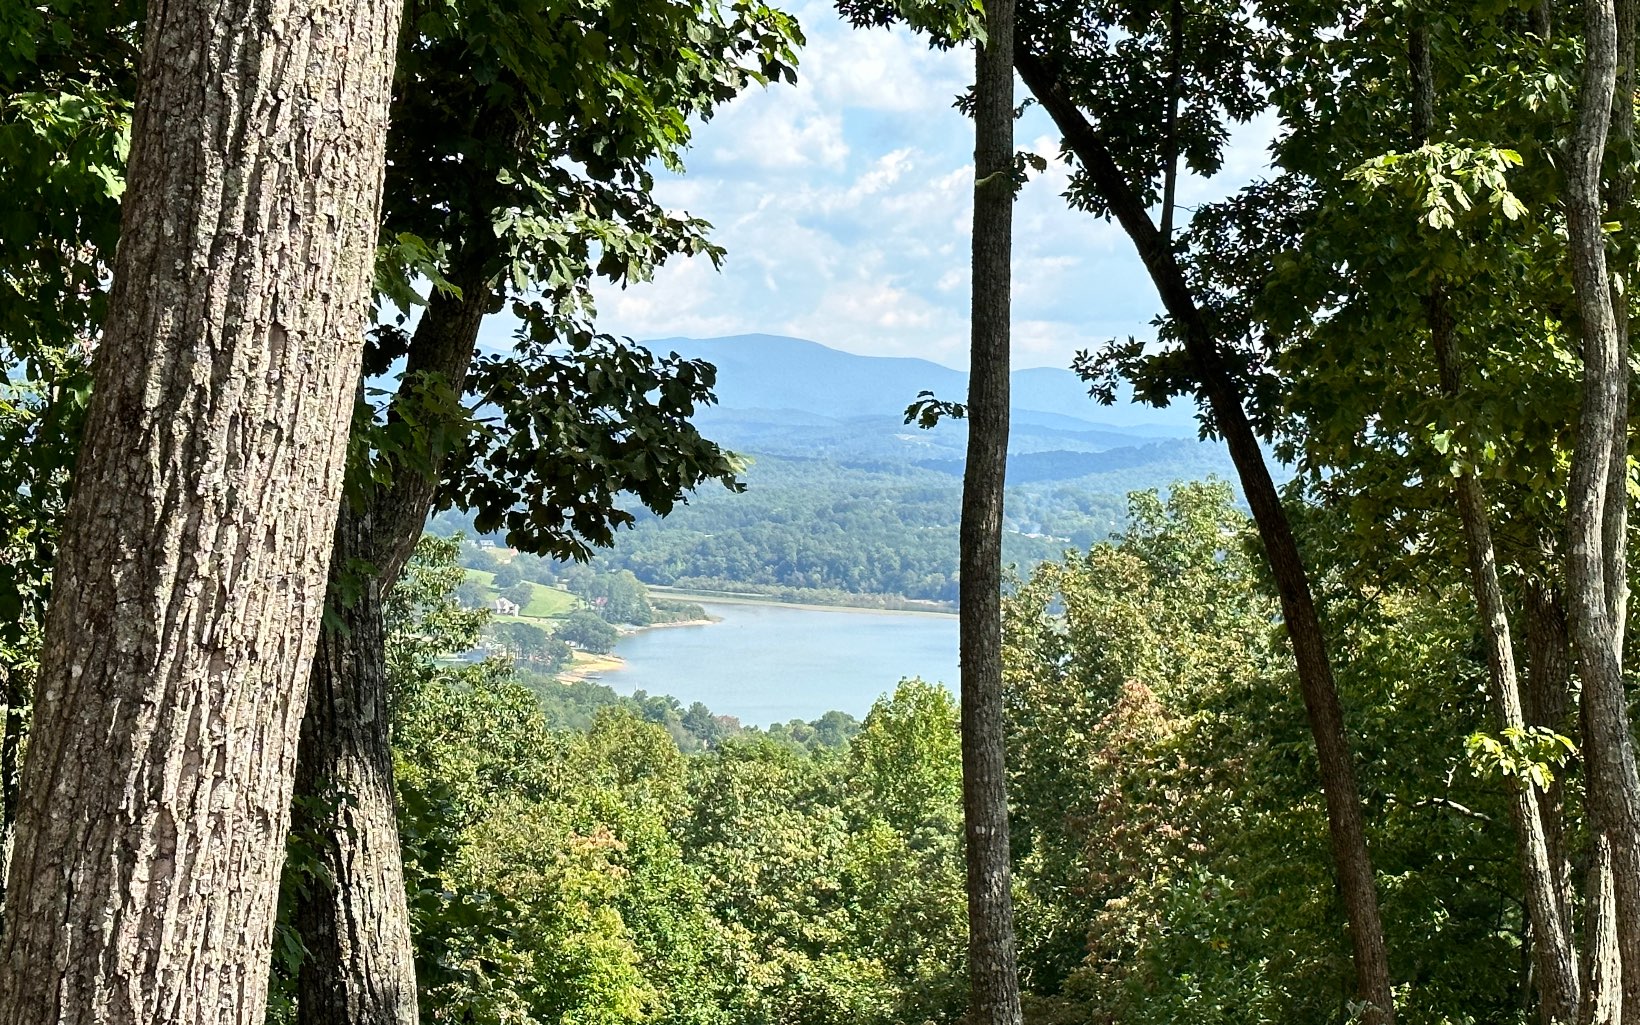 Want the best view in Blairsville? Lot 54 is situated at the top of one of Blairsville's Lakeside Communities The Crown Point at Highland Park Subdivision. Breathtaking Year long Mountain and Lake views can be yours along with top of the line amenities such as Lakeside Clubhouse with fitness center, kitchen, game room, outdoor grilling area, boat slips, lake access and a gorgeous infinity pool that overlooks Lake Nottely.